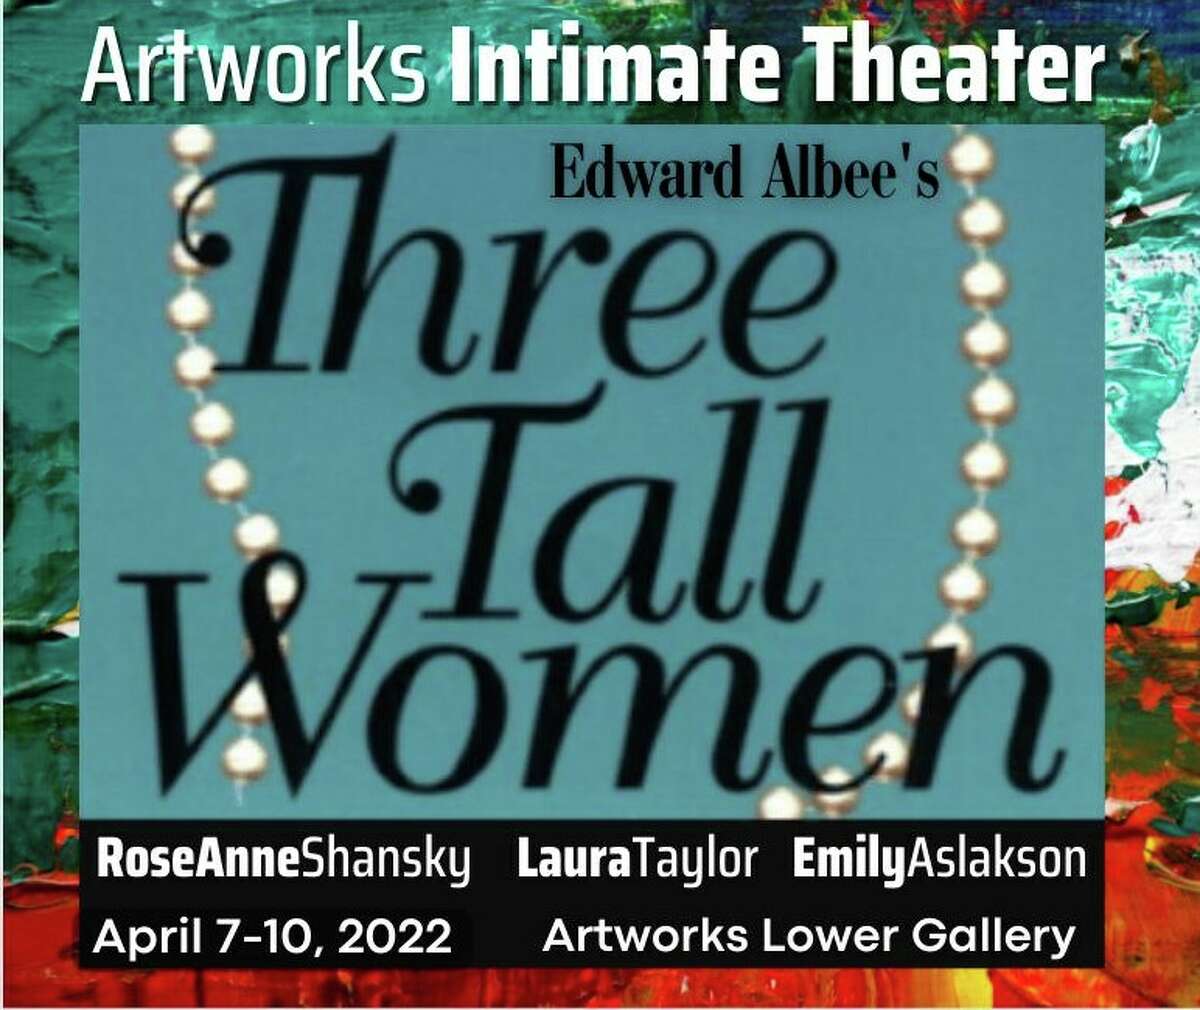 Edward Albee's Pulitzer Prize winning play, "Three Tall Women" will be performed in the Intimate Theatre at Artworks in Big Rapids, directed by Jim Samuels. Opening day is April 7. Tickets go on sale March 25.